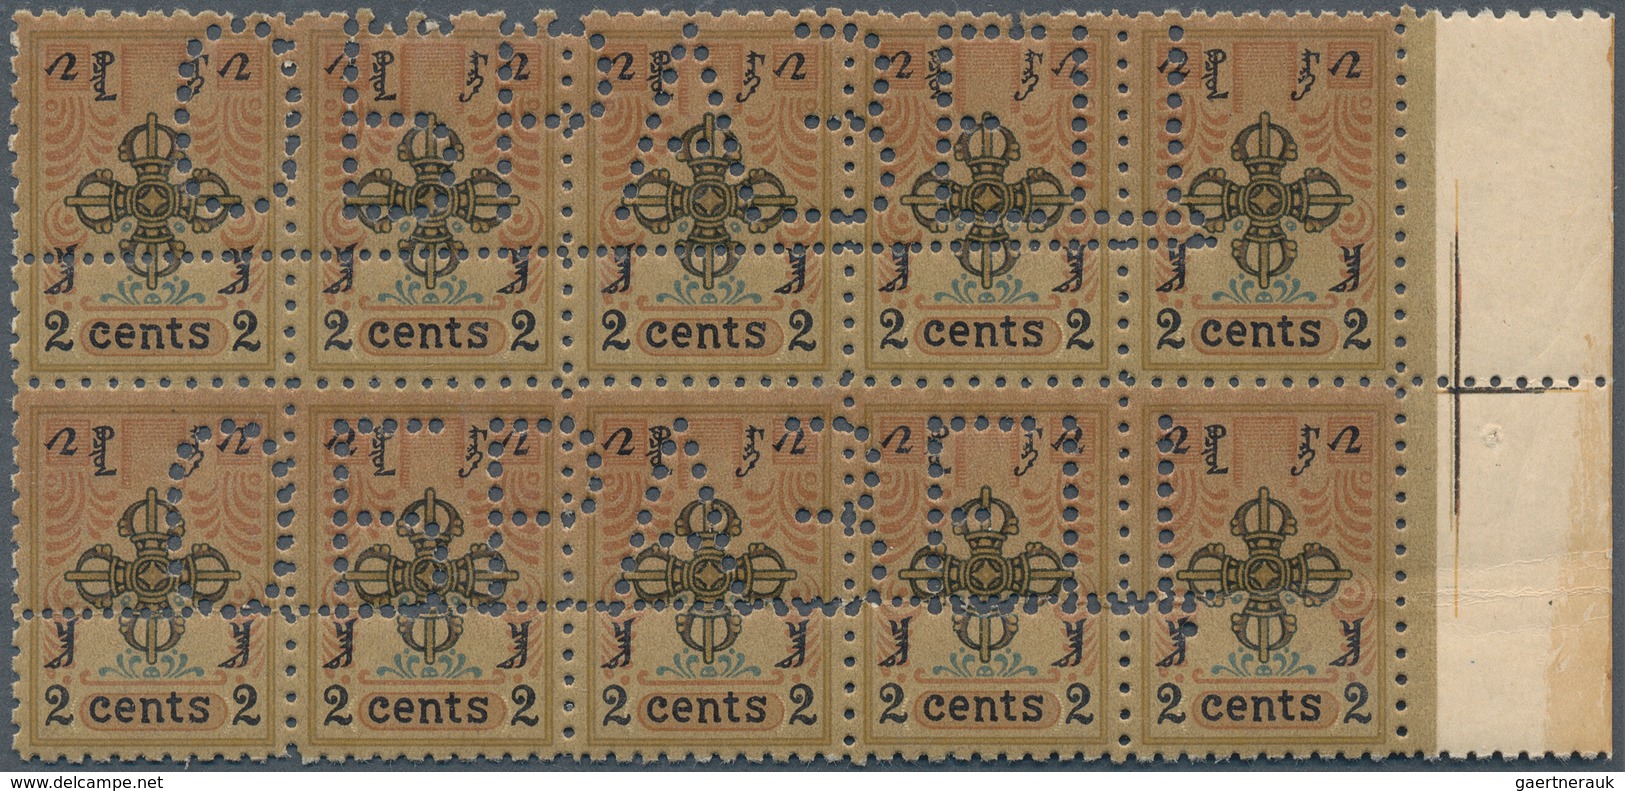 Mongolei: 1924 First Issue 2c. Right Hand Marginal Block Of 10, Perf 10, Additionally Perforated "ОБ - Mongolie